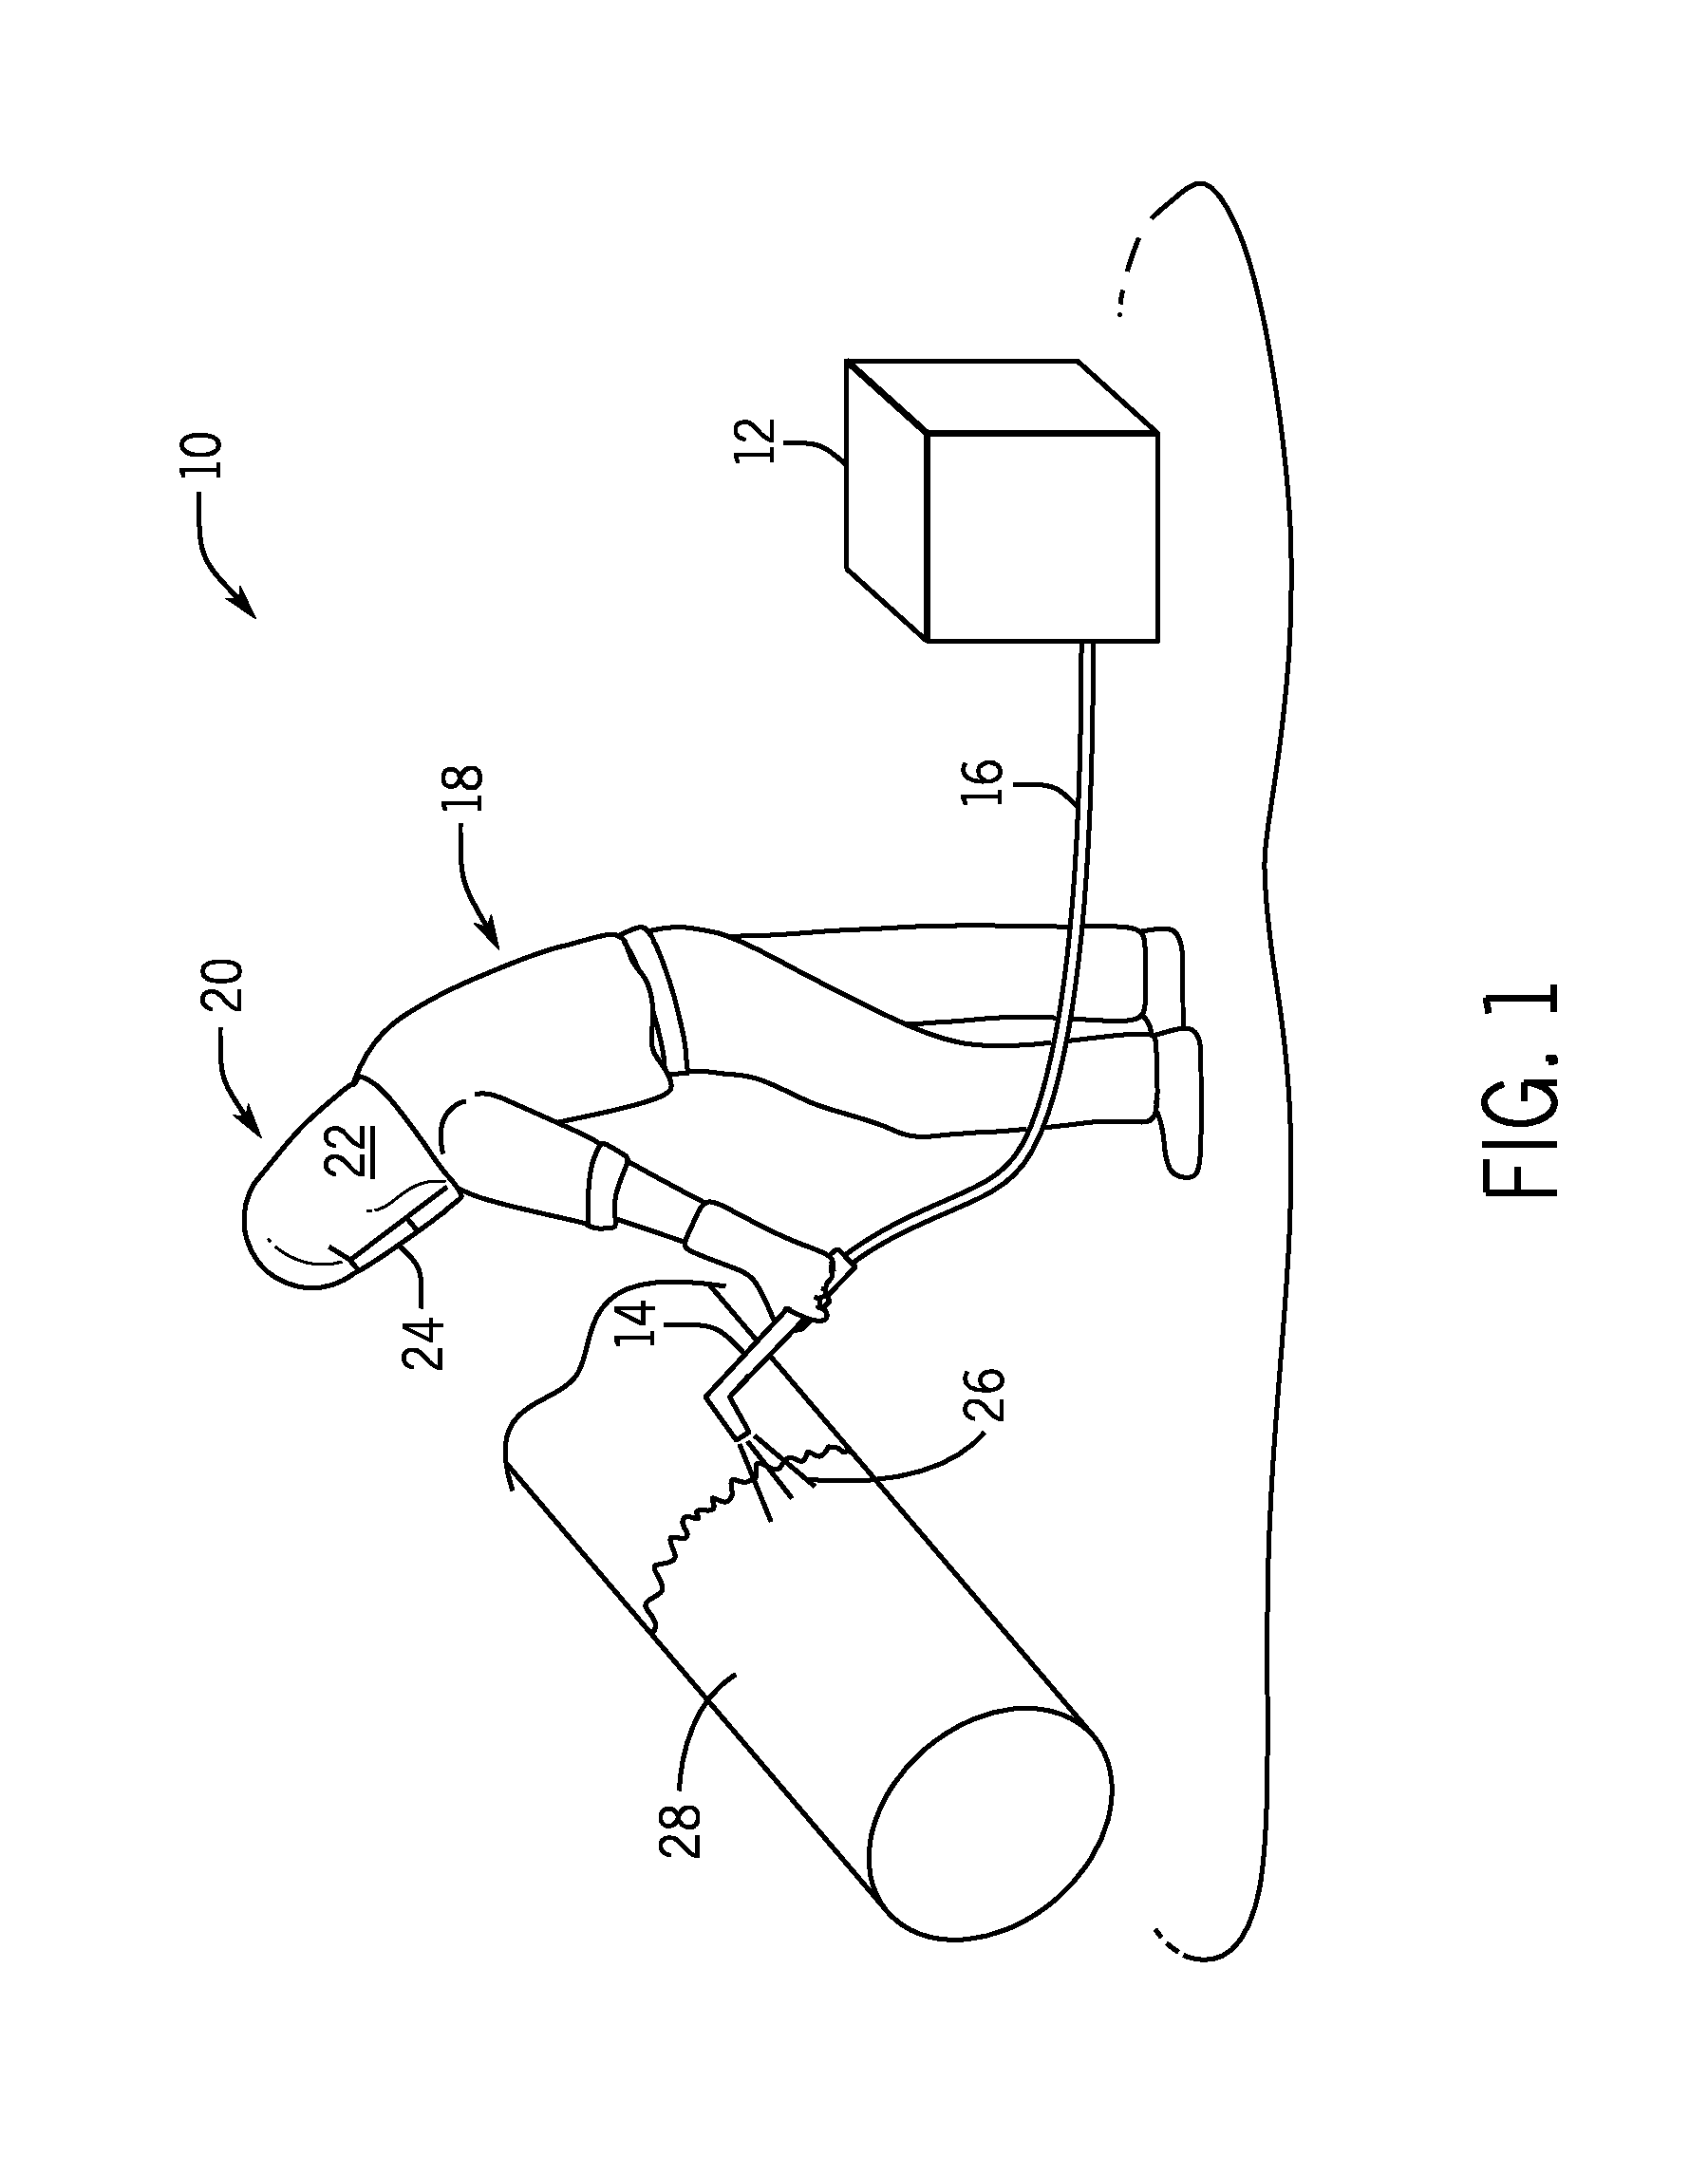 Welding system for determining a quality of a welding operation